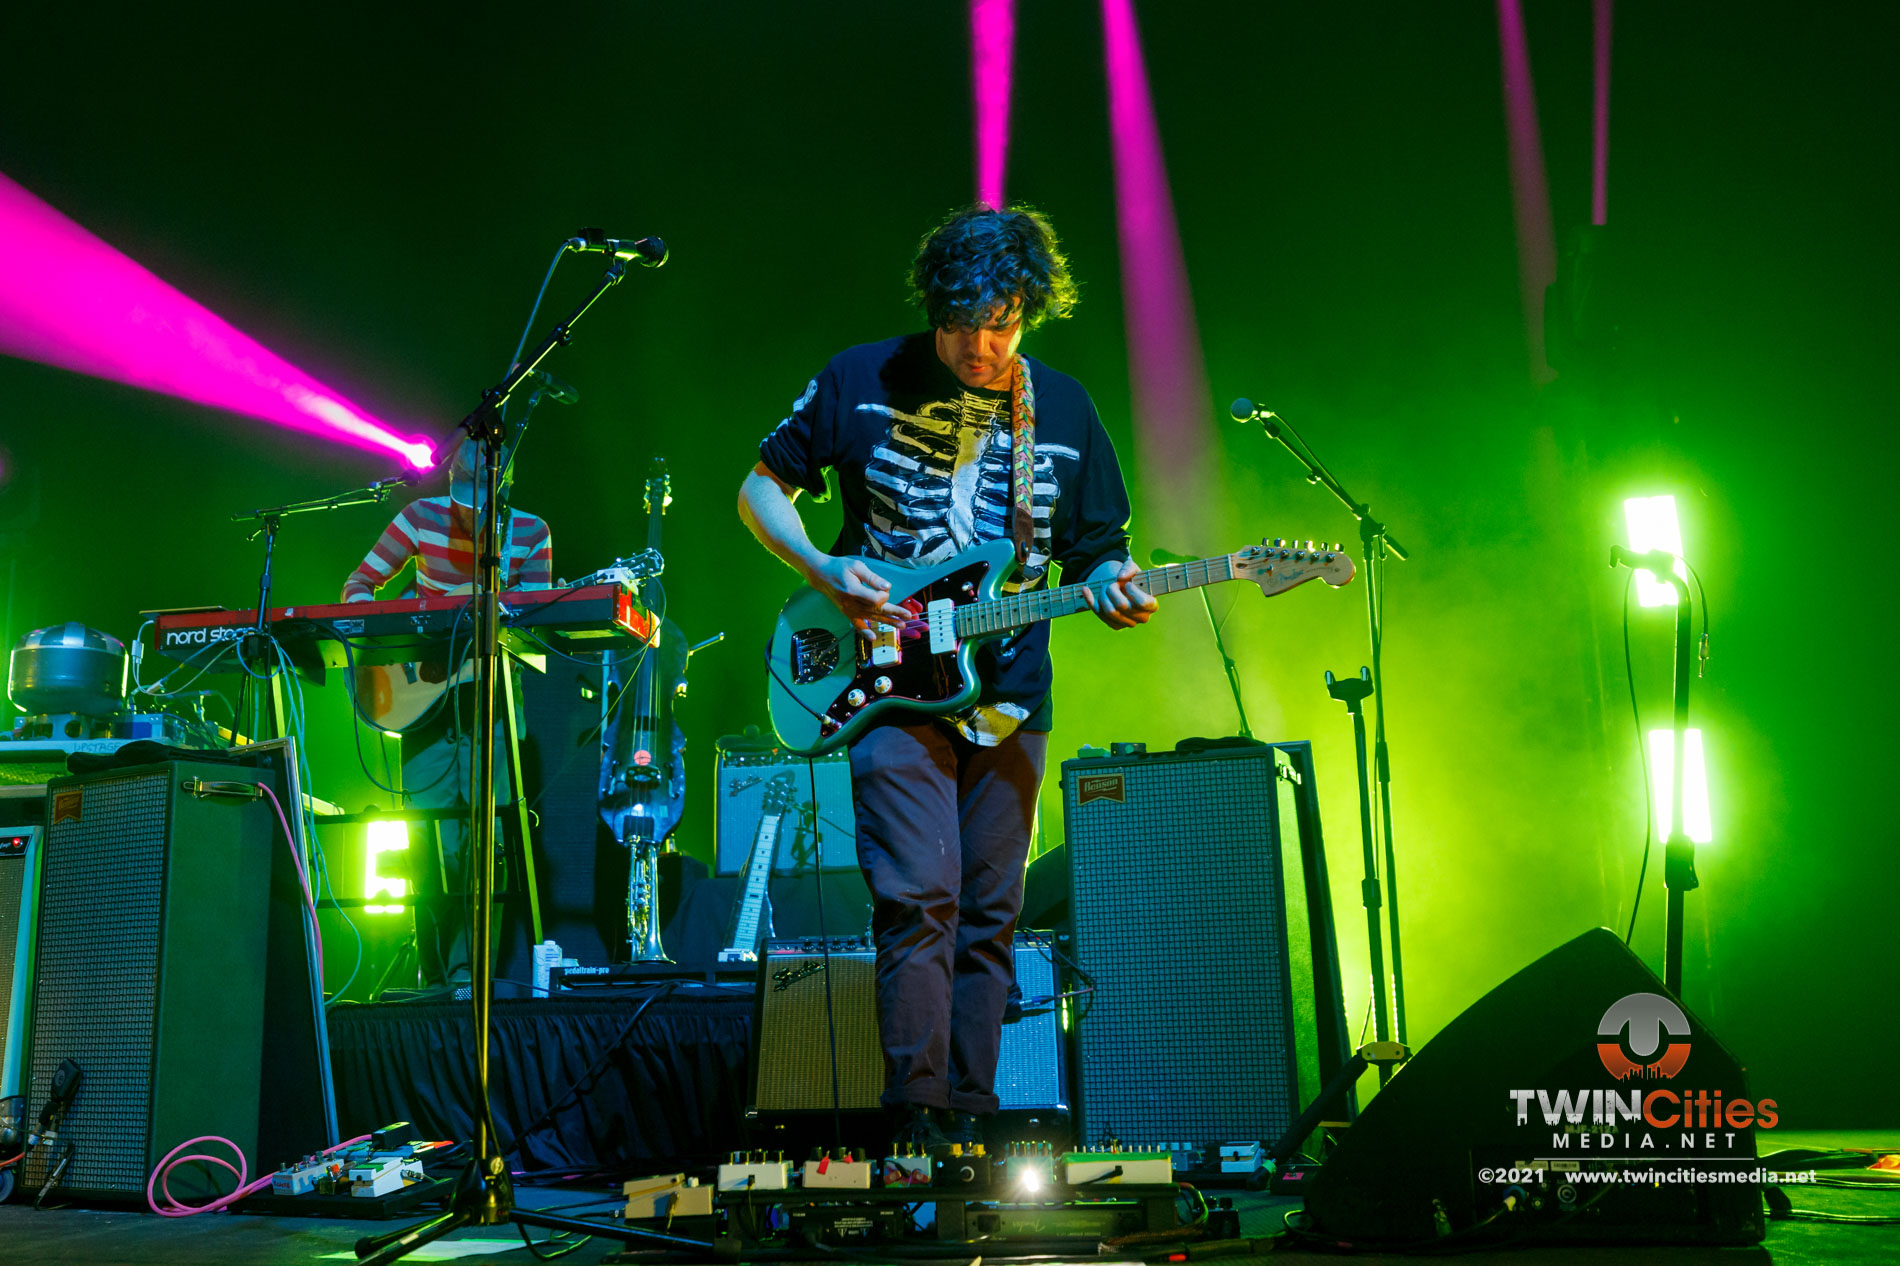 August 22, 2021 - Minneapolis, Minnesota, United States - Modest Mouse live in concert at the The Armory along with The Districts as the openers.

(Photo by Seth Steffenhagen/Steffenhagen Photography)